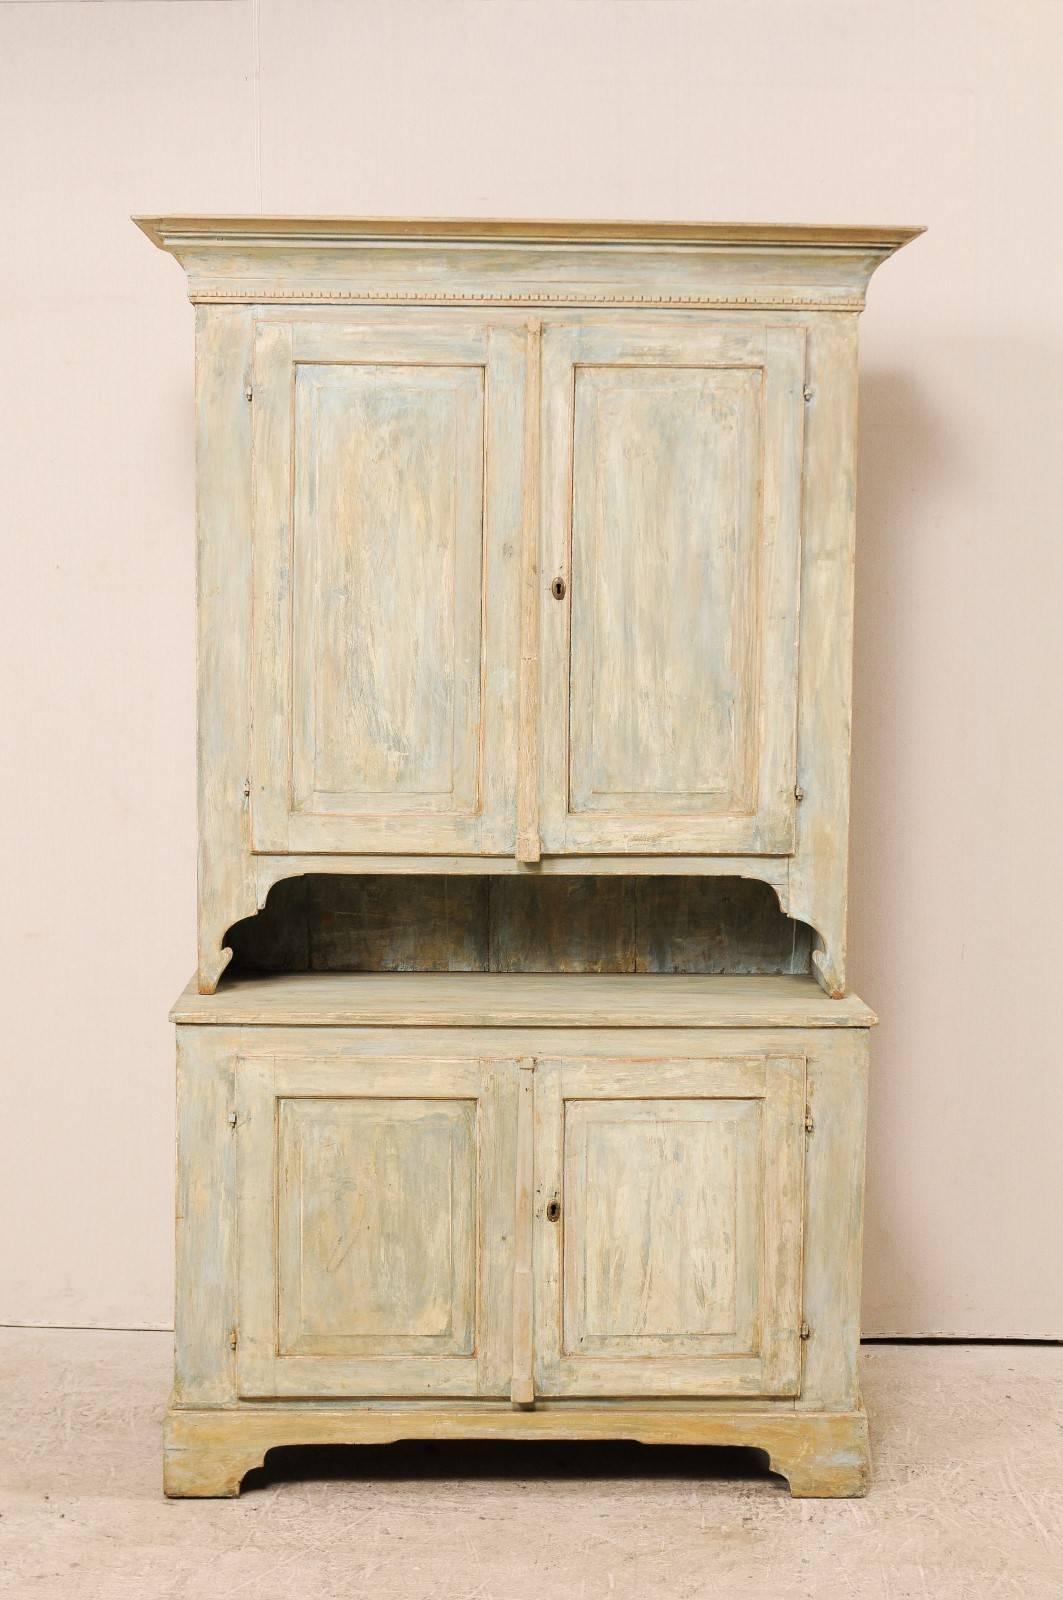 A 19th century Swedish Karl Johan painted wood two-piece cabinet. This tall antique Swedish cabinet has a two door upper case which is set back upon a shelved base, two door cabinets. This cabinet features four raised panel doors, traditional